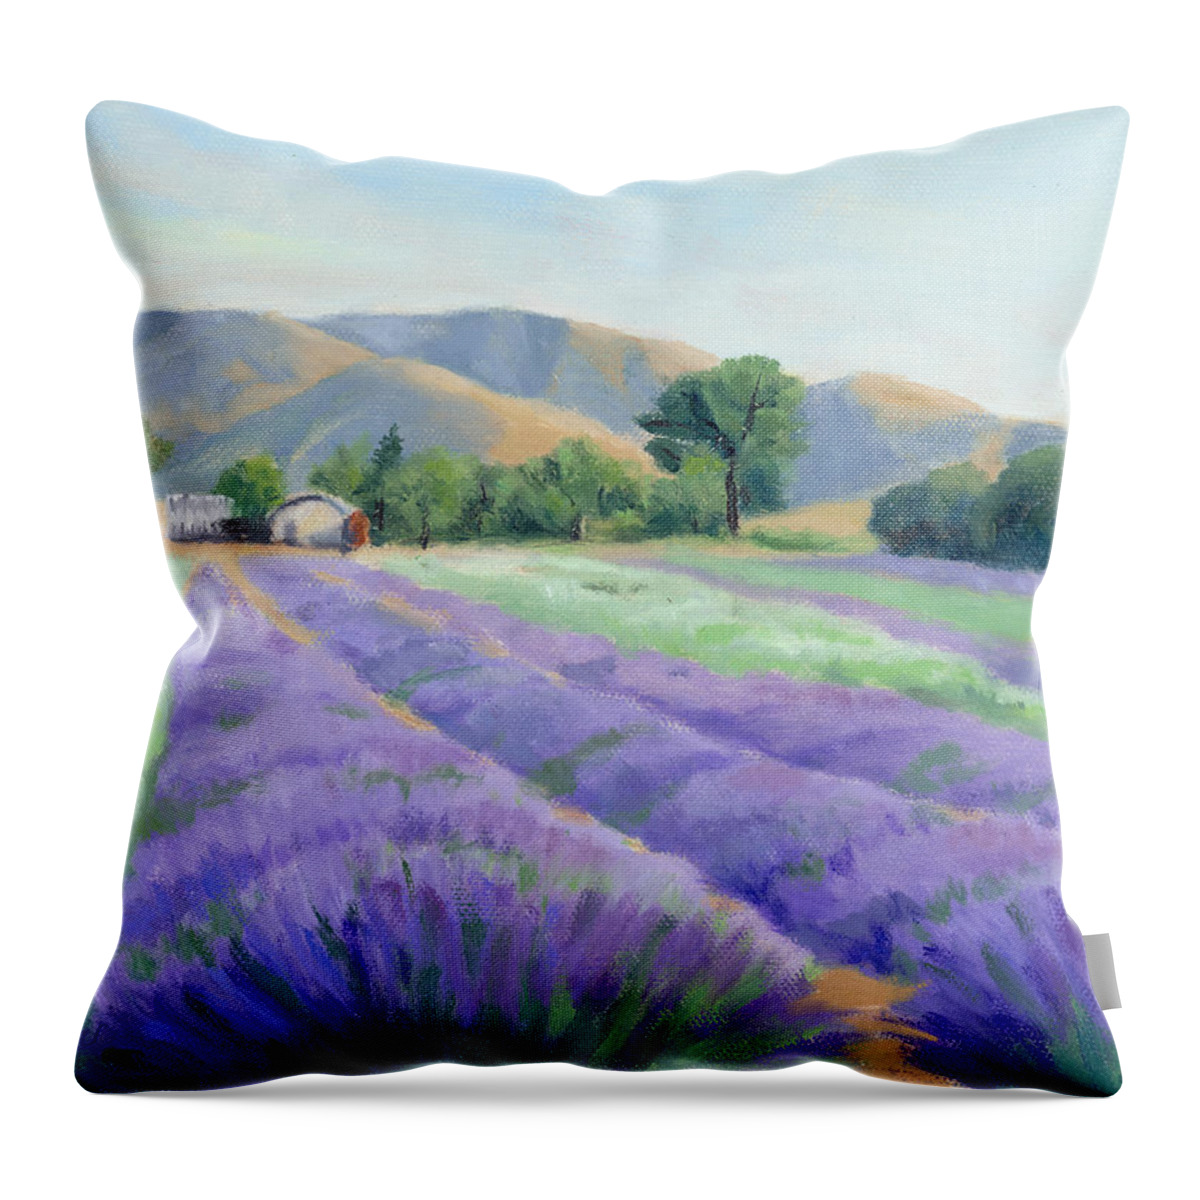 California Landscape Throw Pillow featuring the painting Lavender Lines by Sandy Fisher